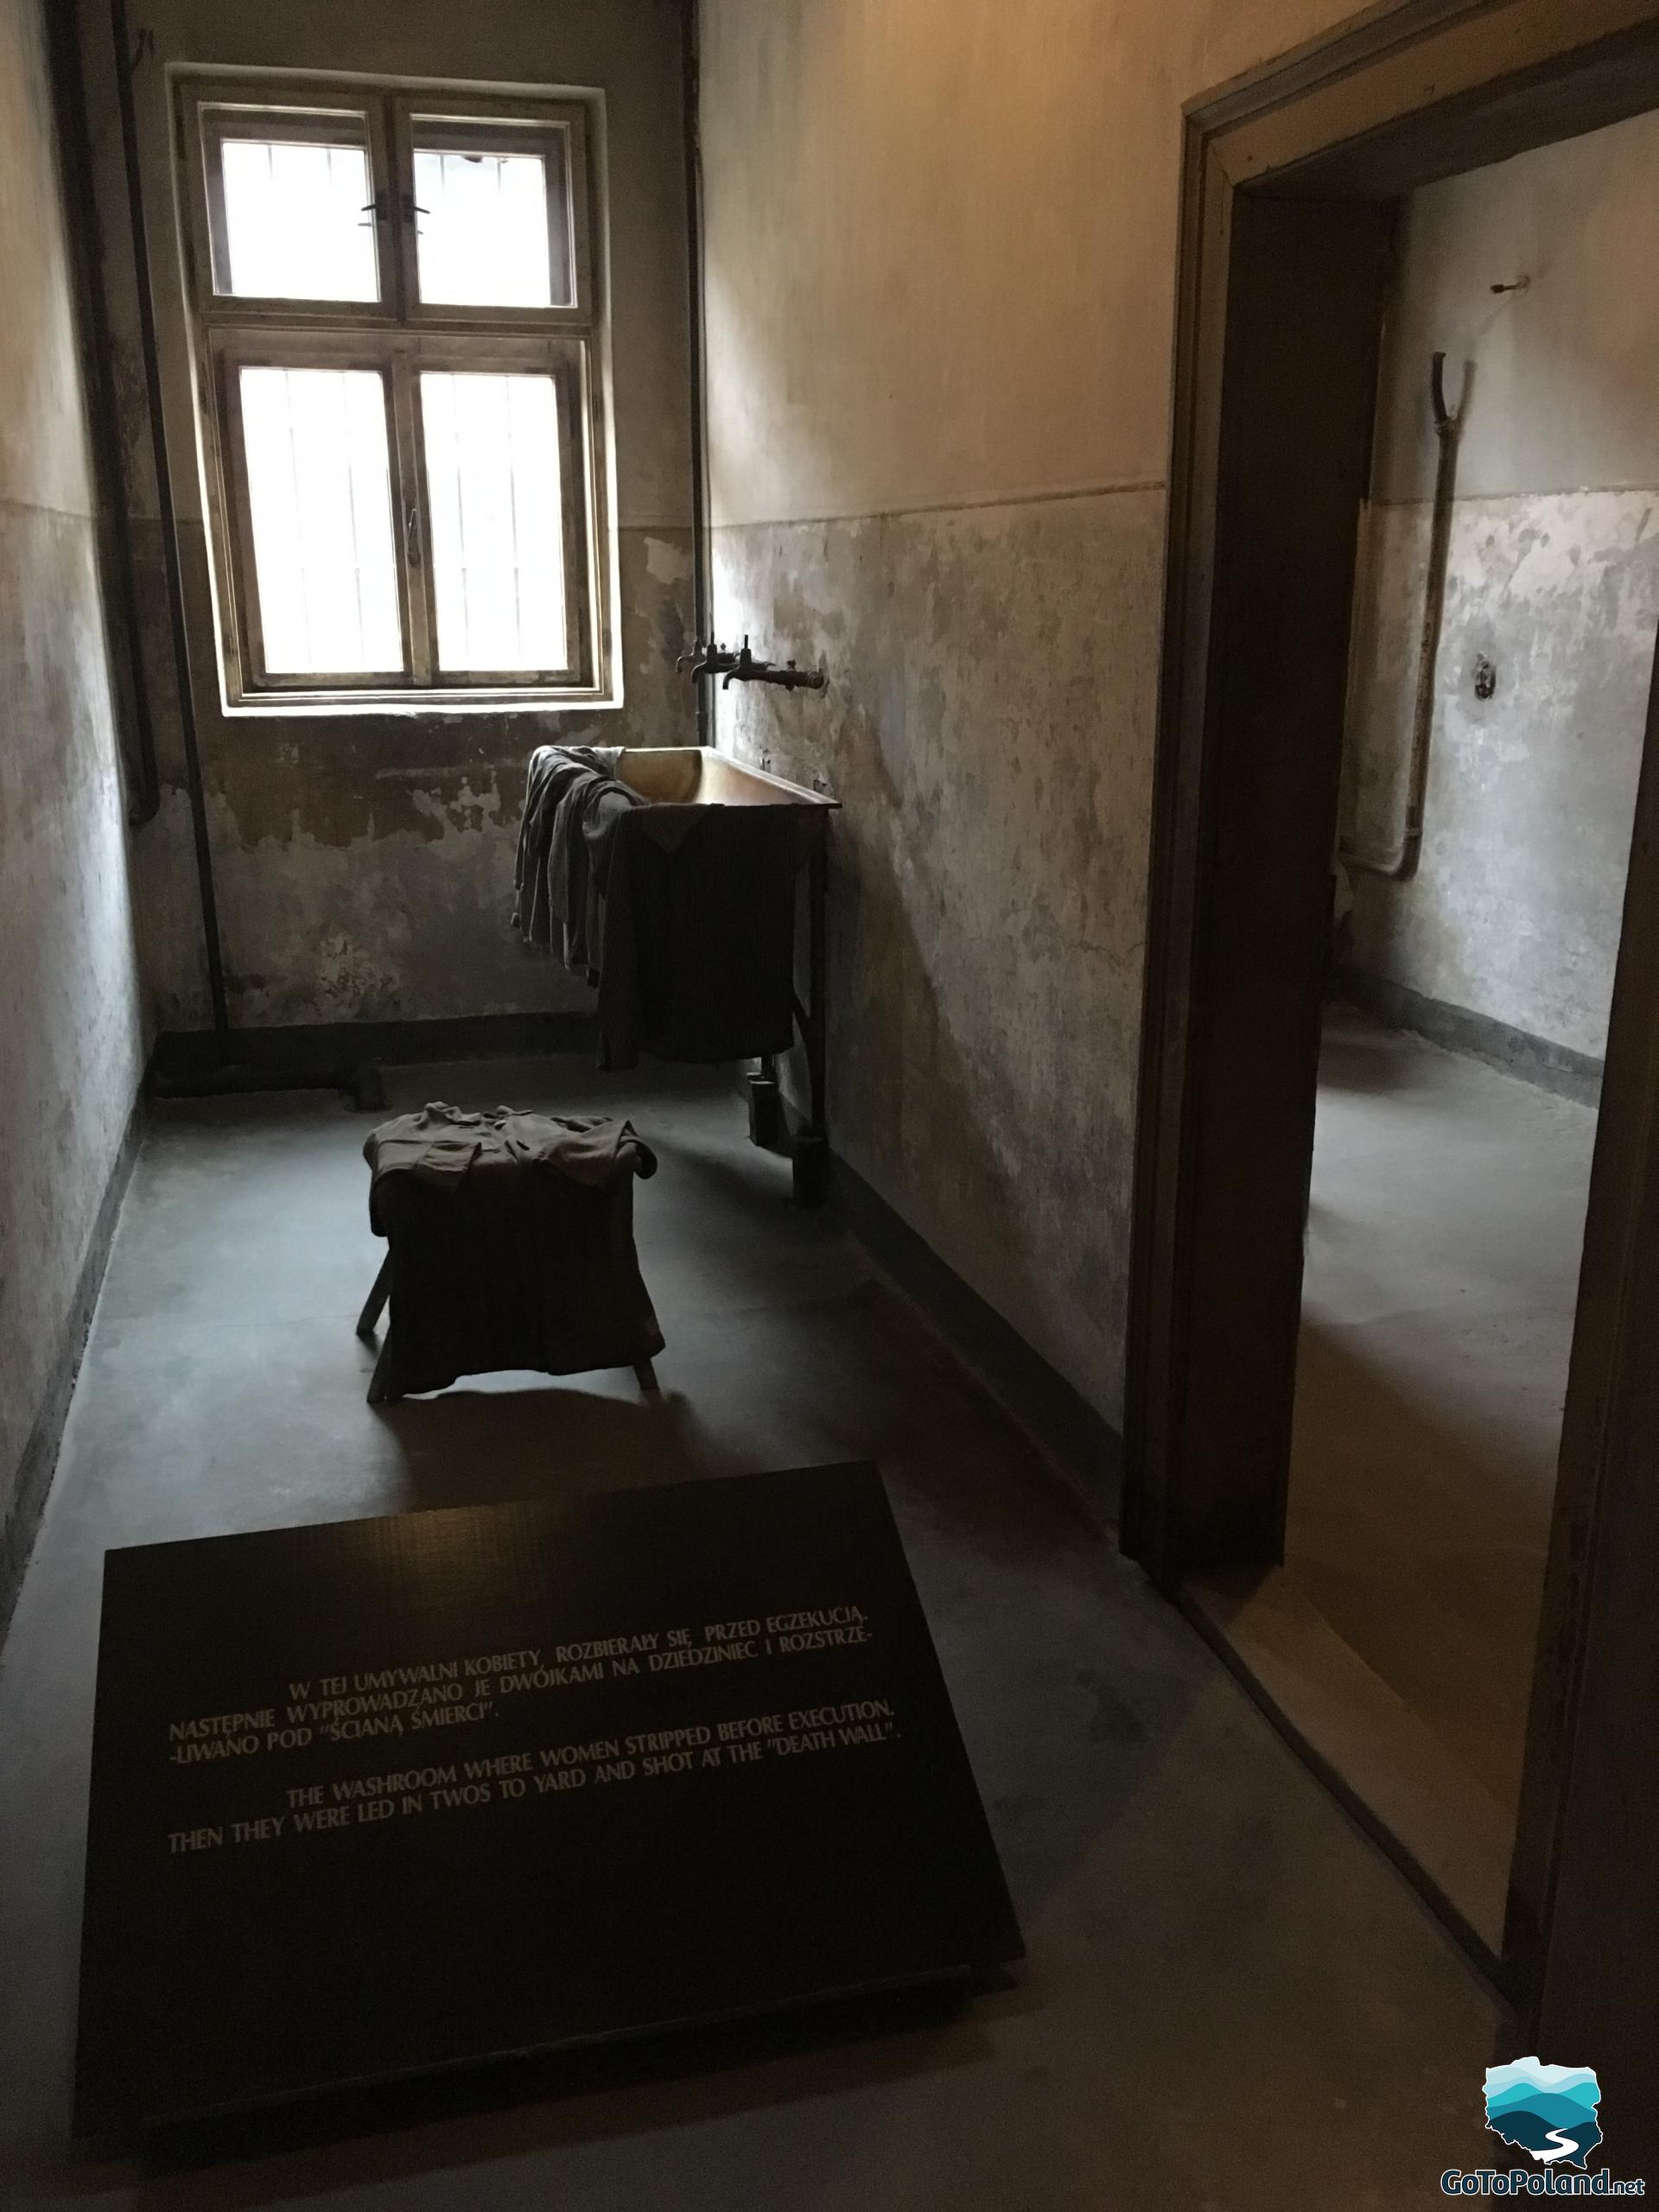 a washroom where women stripped before execution